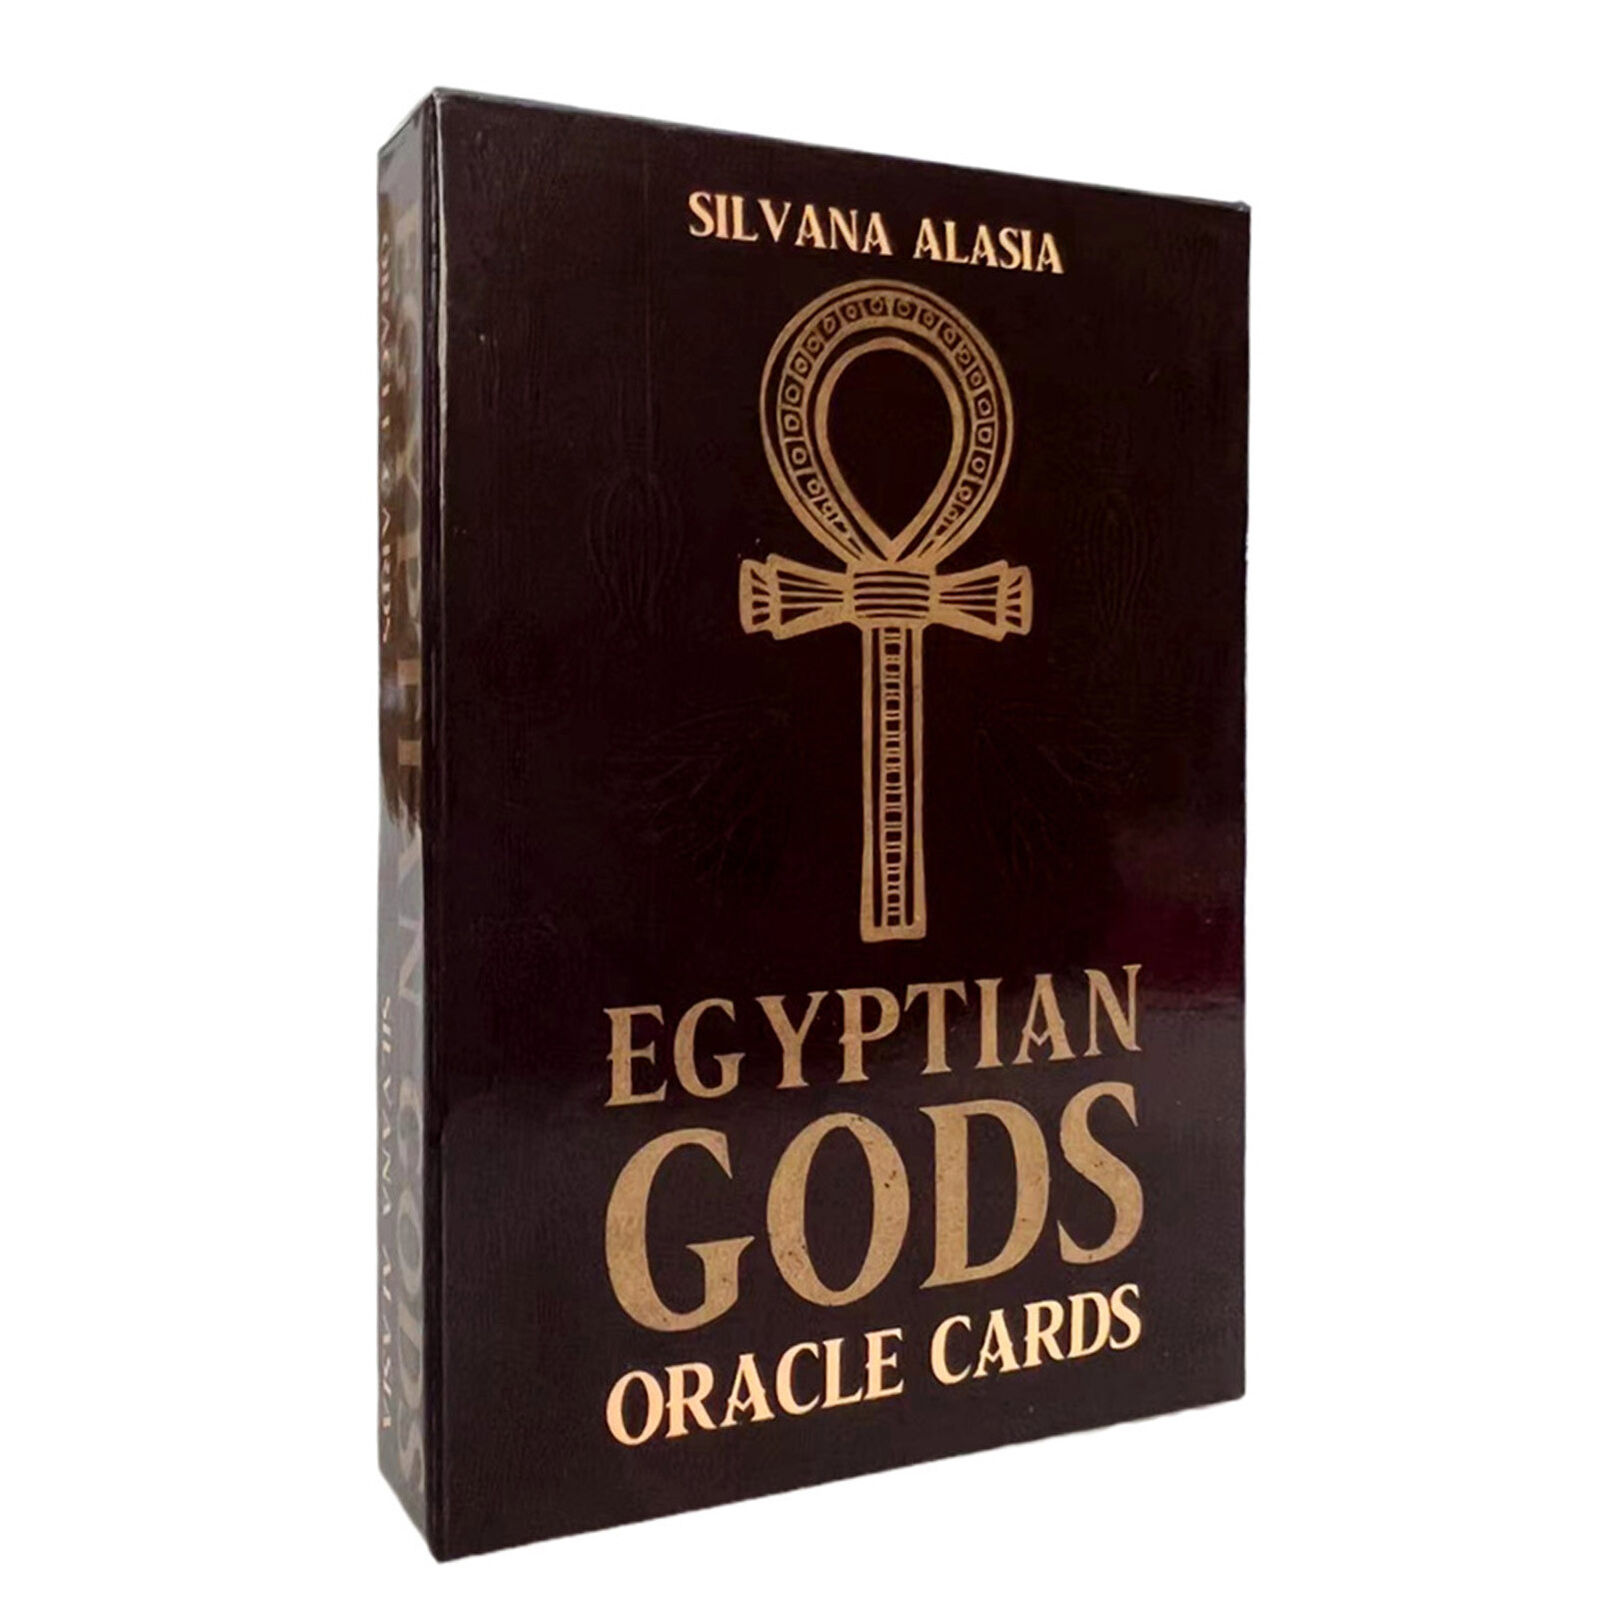 EGYPTIAN GODS ORACLE CARDS 36 Cards Brand New